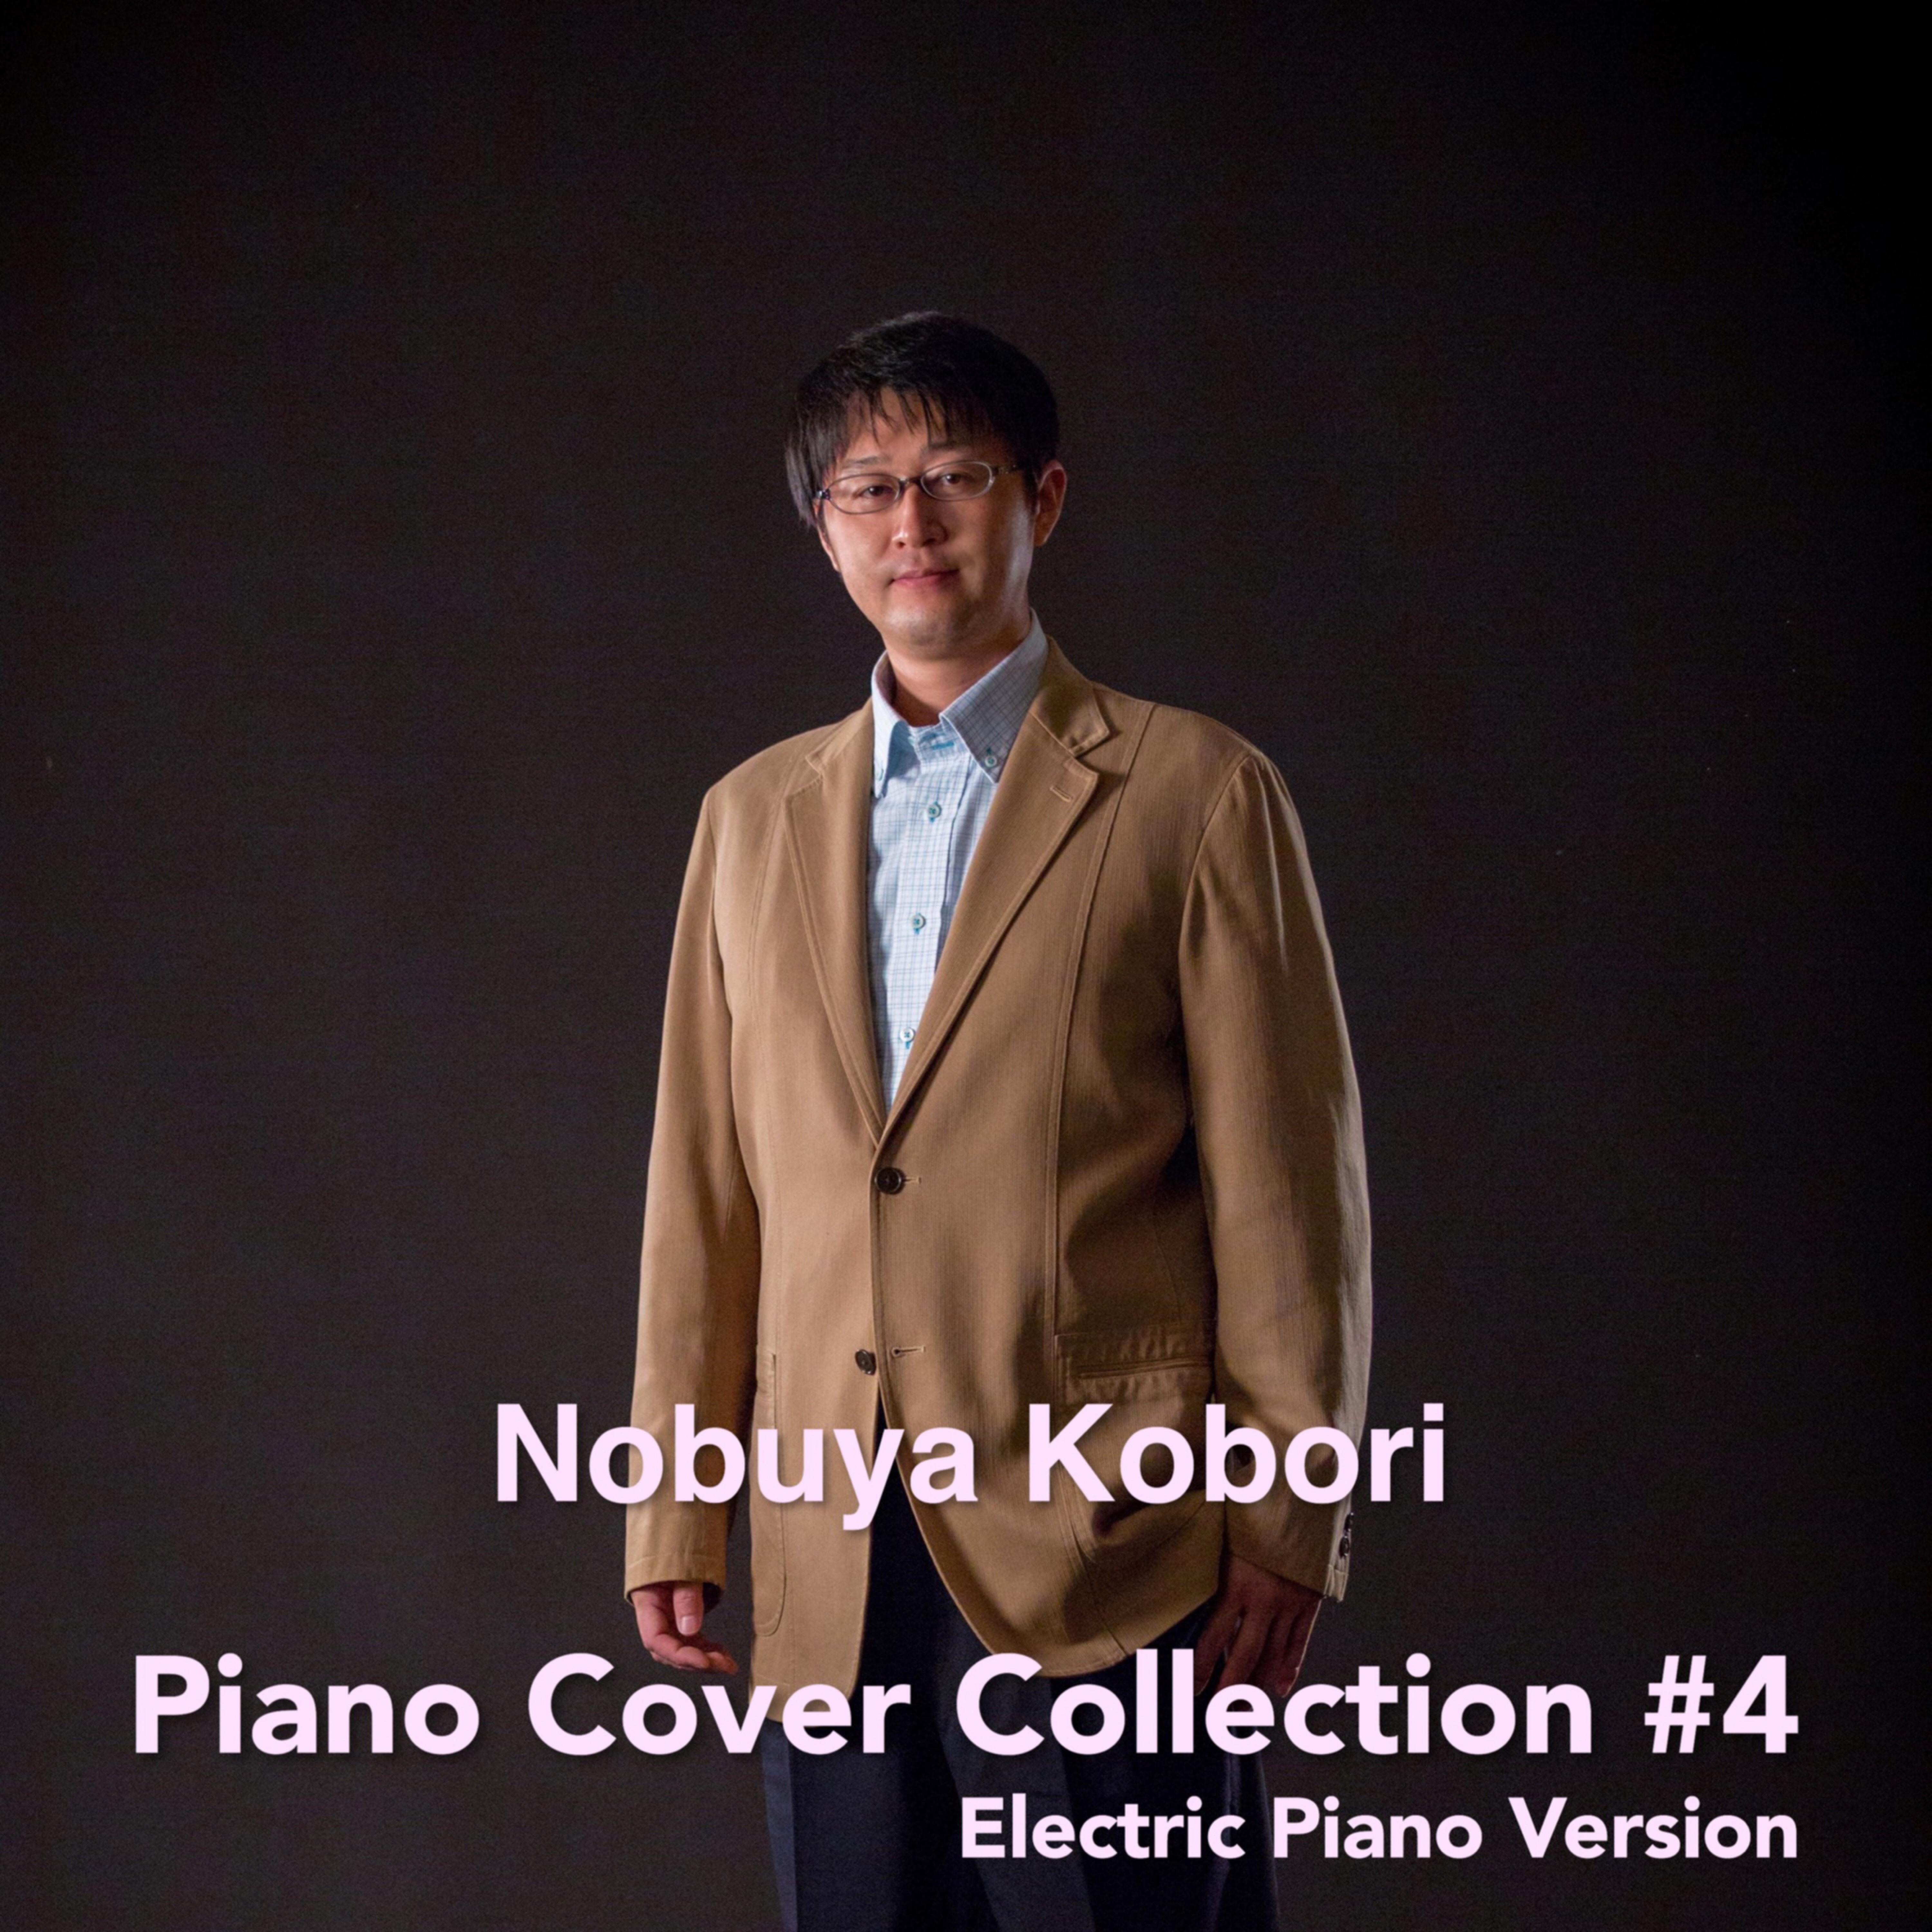 Piano Cover Collection #4